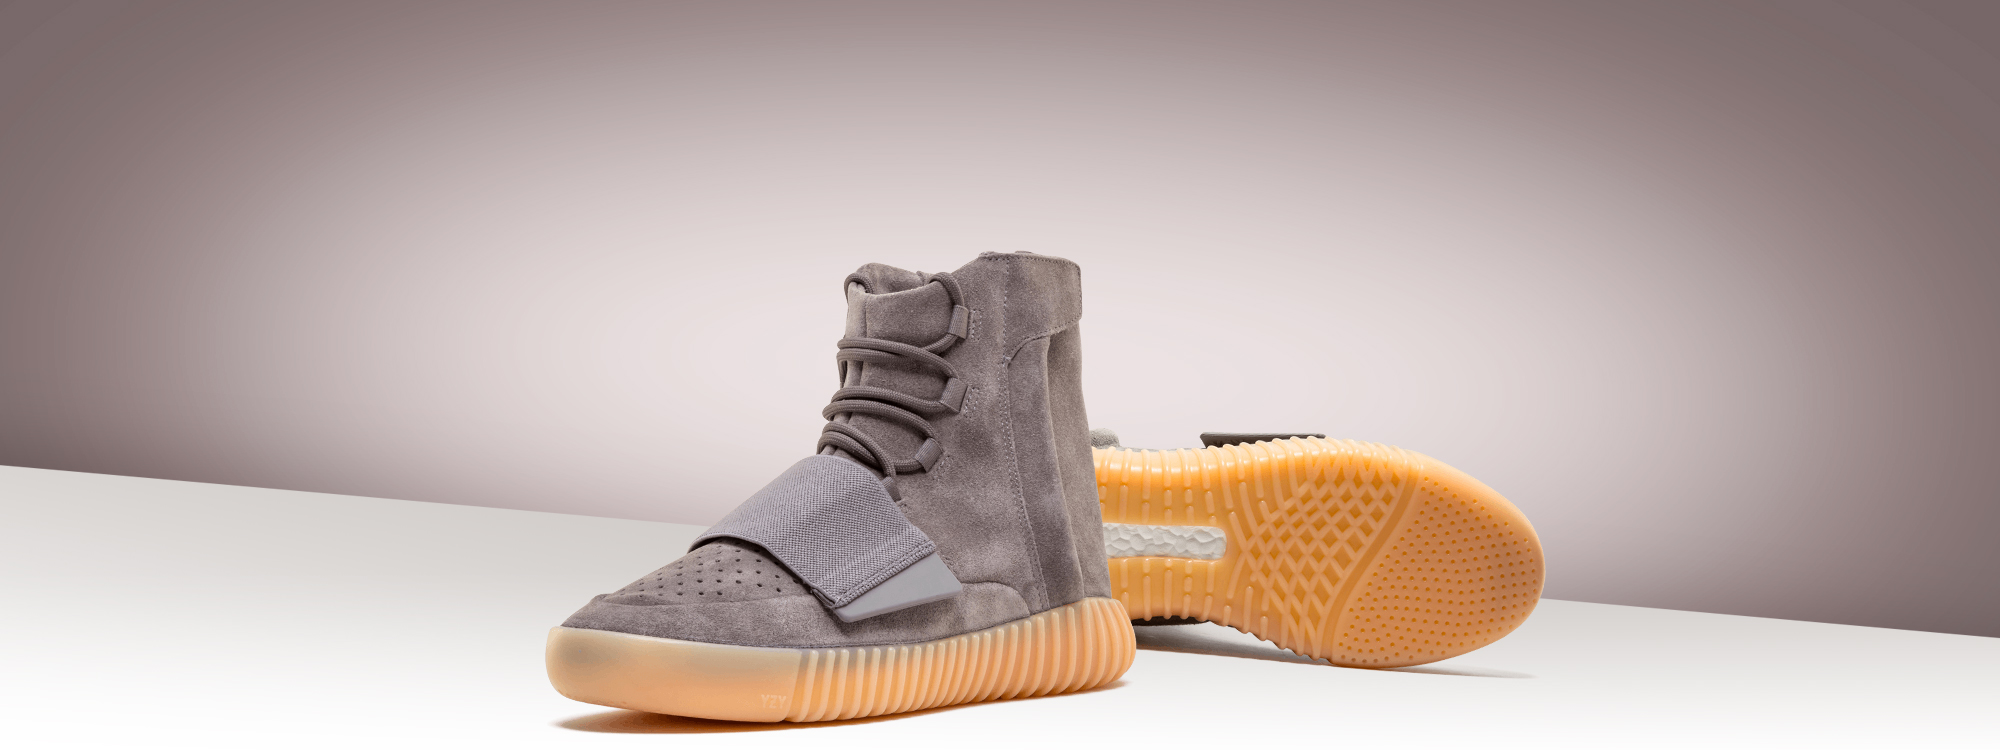  Yeezy Boost 750  Light Grey / Gum shoes price